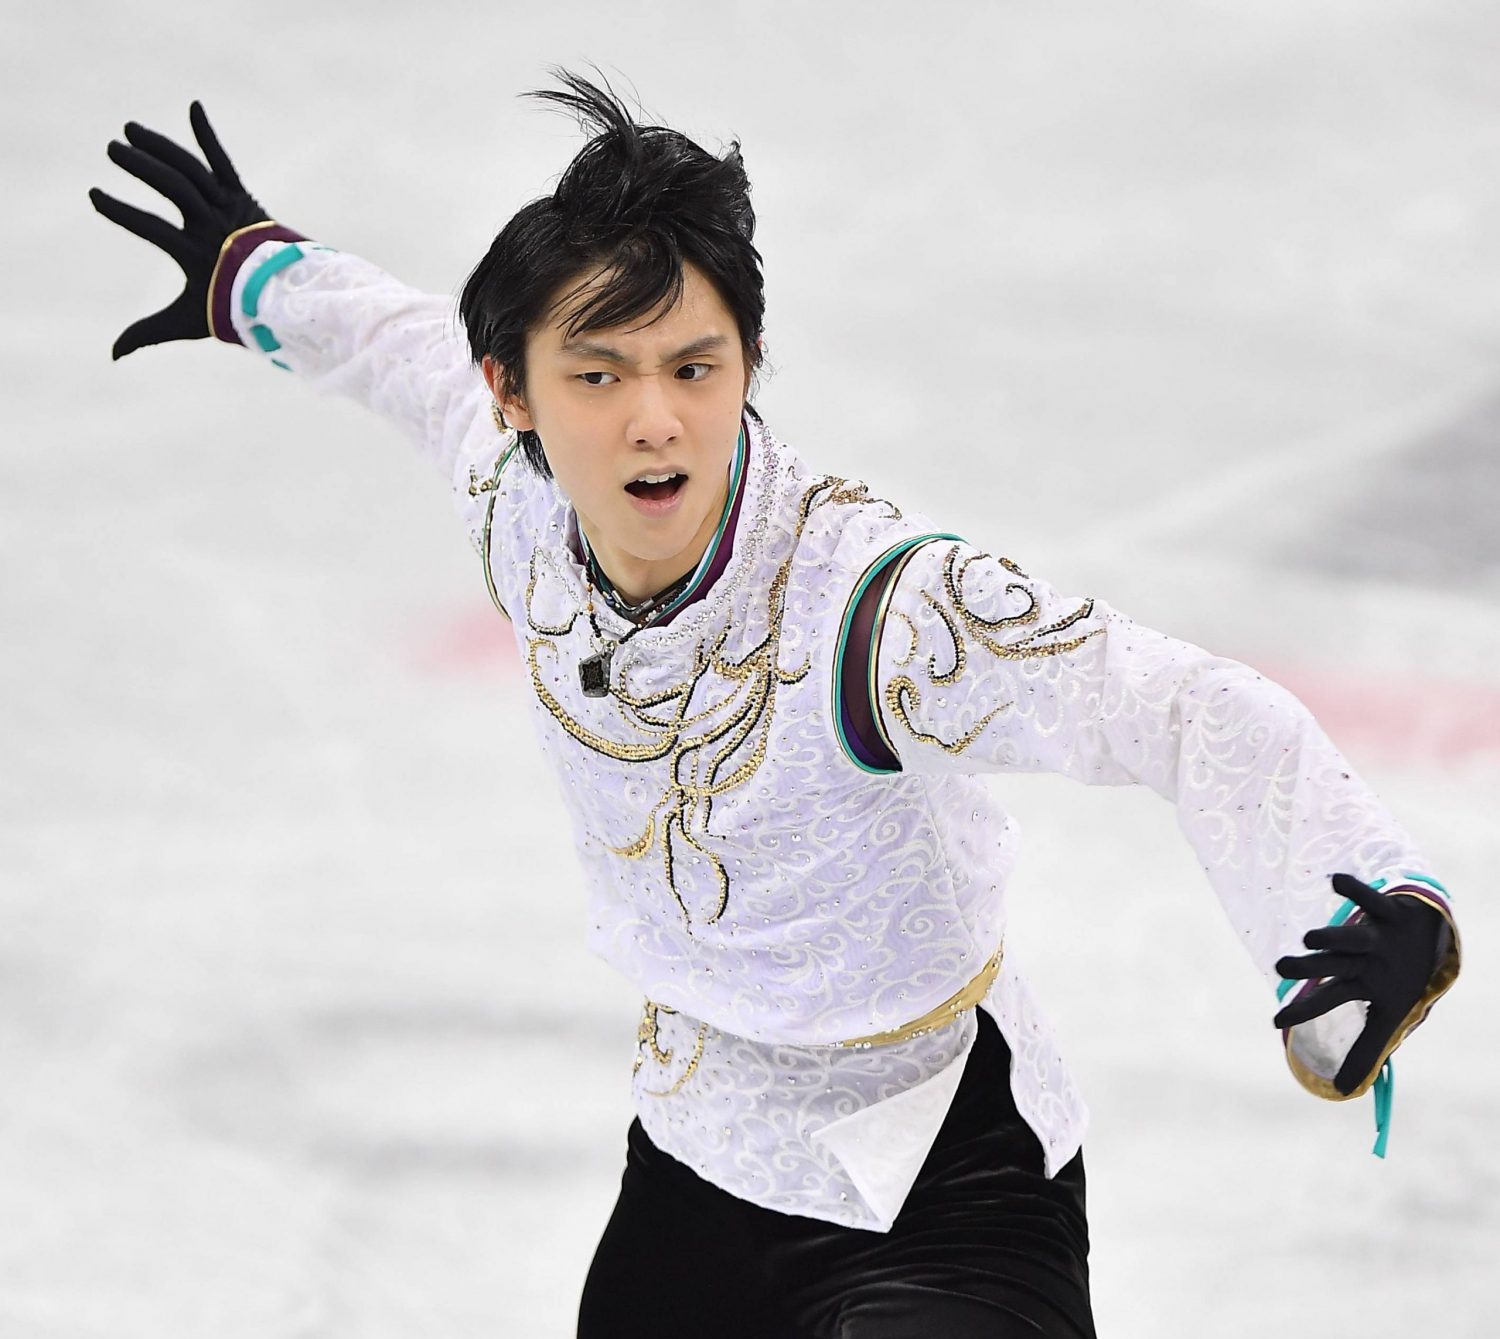 FIGURE SKATING | Yuzuru Hanyu Announces Retirement From Competition, Will Continue Career as a Pro Skater | JAPAN Forward